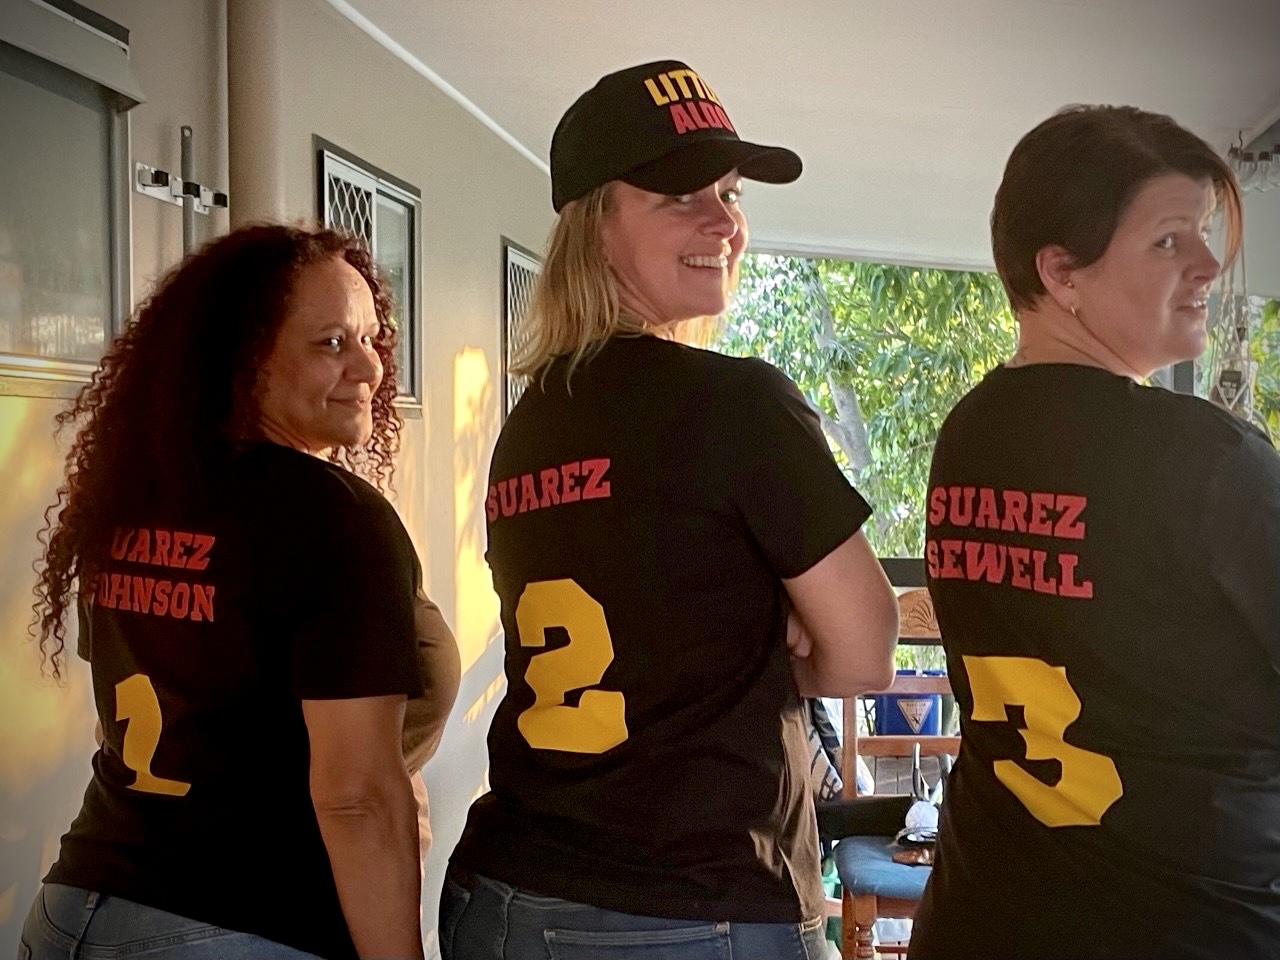 Three ladies in shirts with their names on them